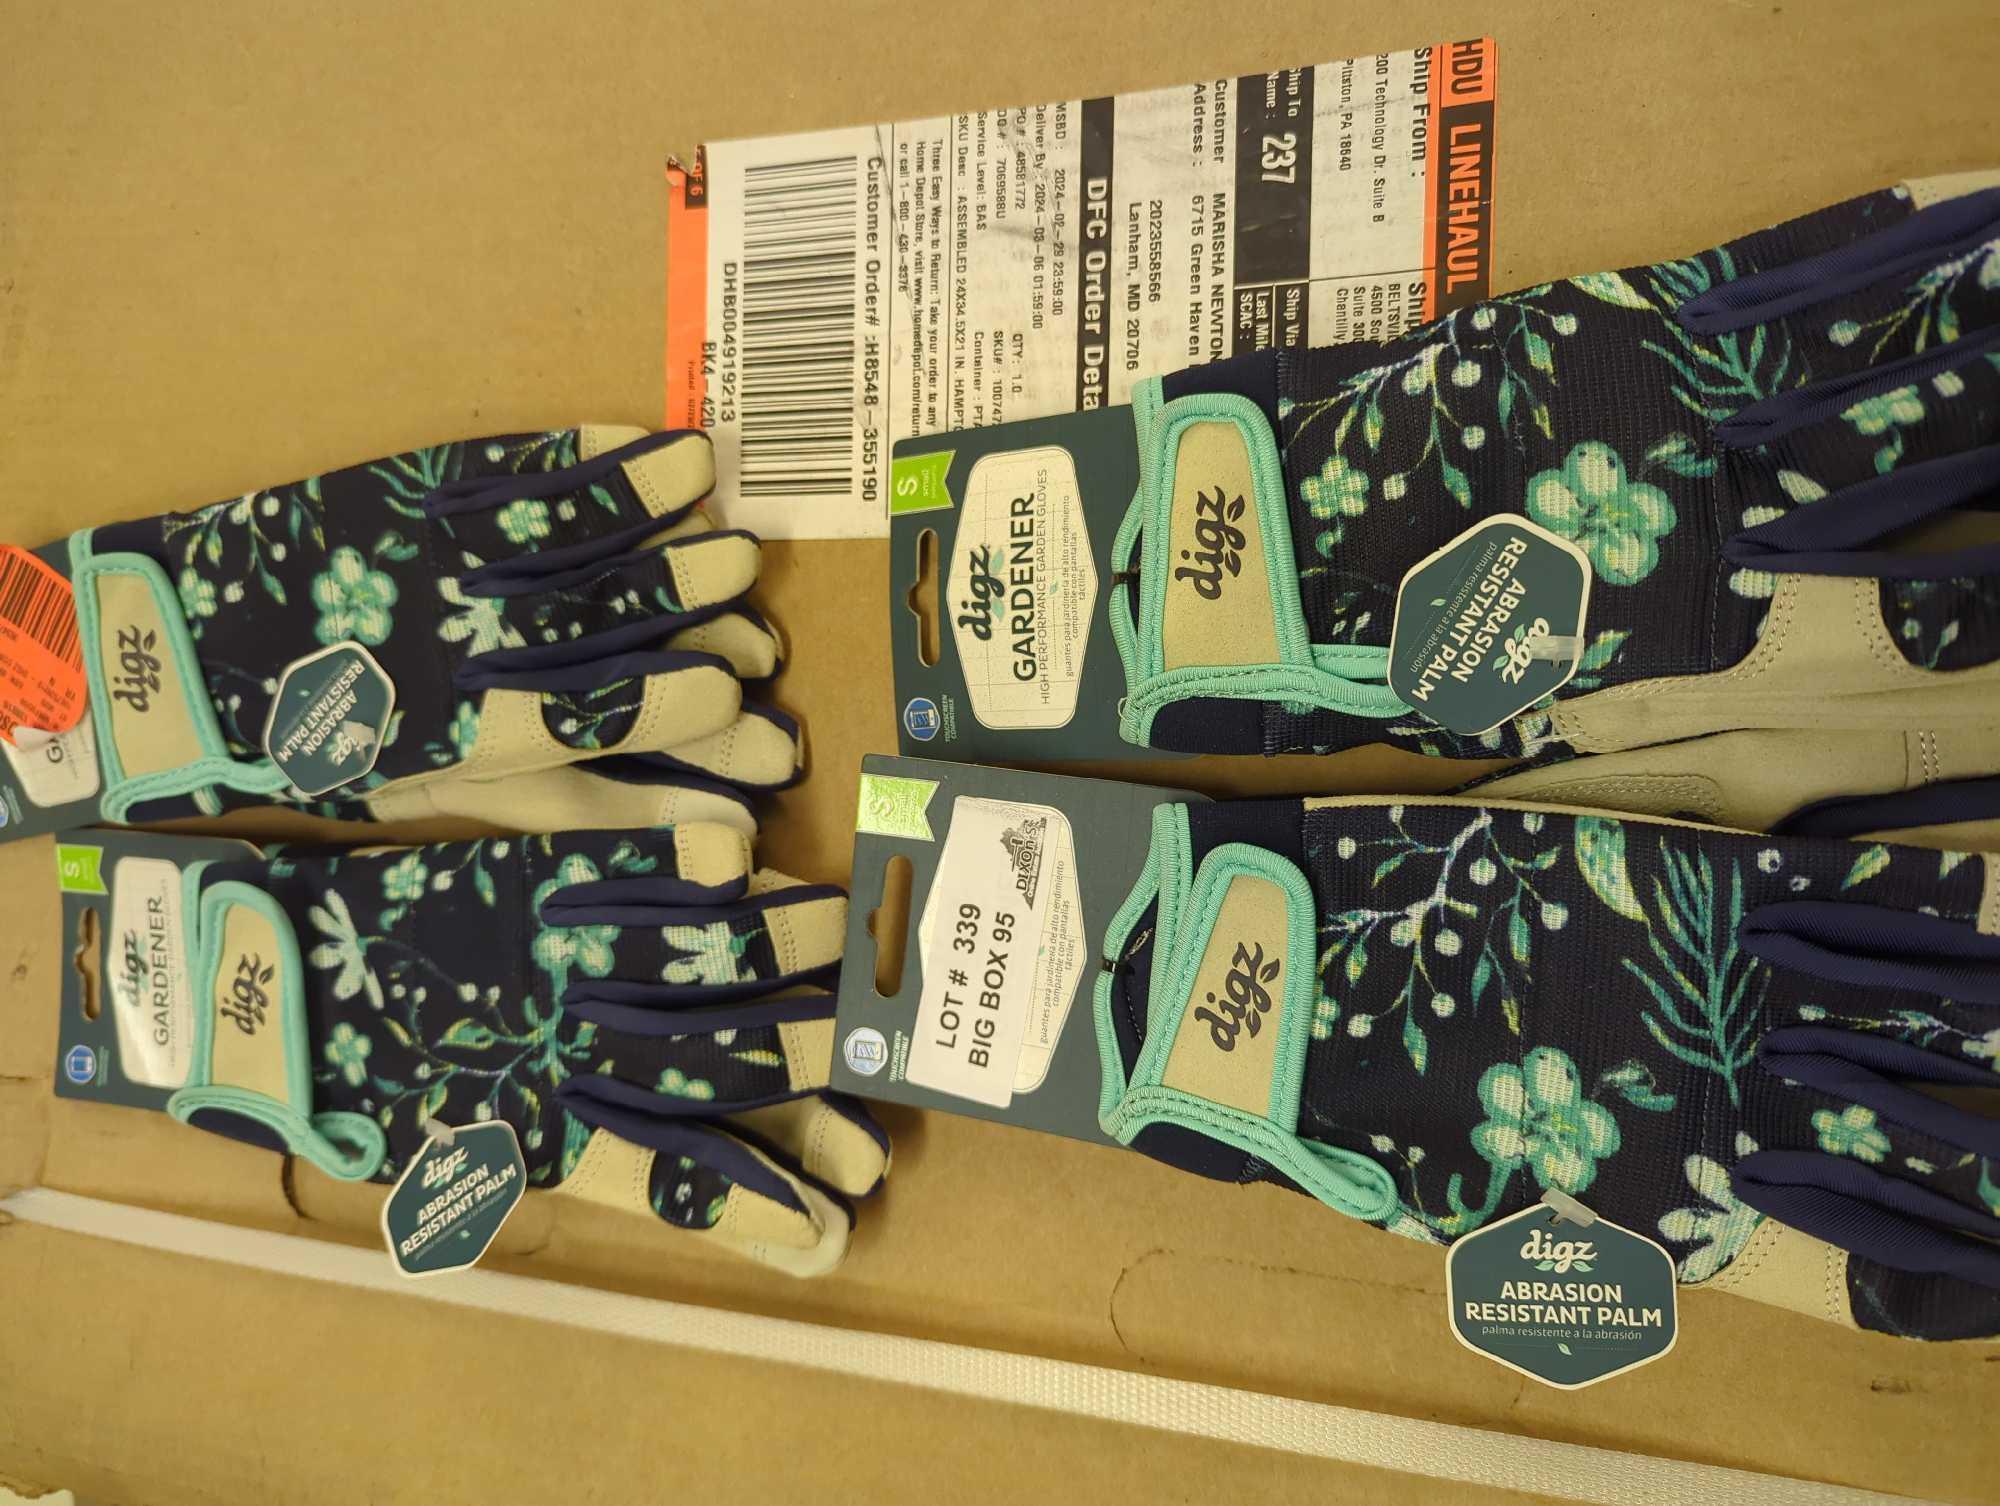 Lot of 4 Pairs of Digz Women's Small Gardener Glove, Appears to be New in Factory Tagged Style